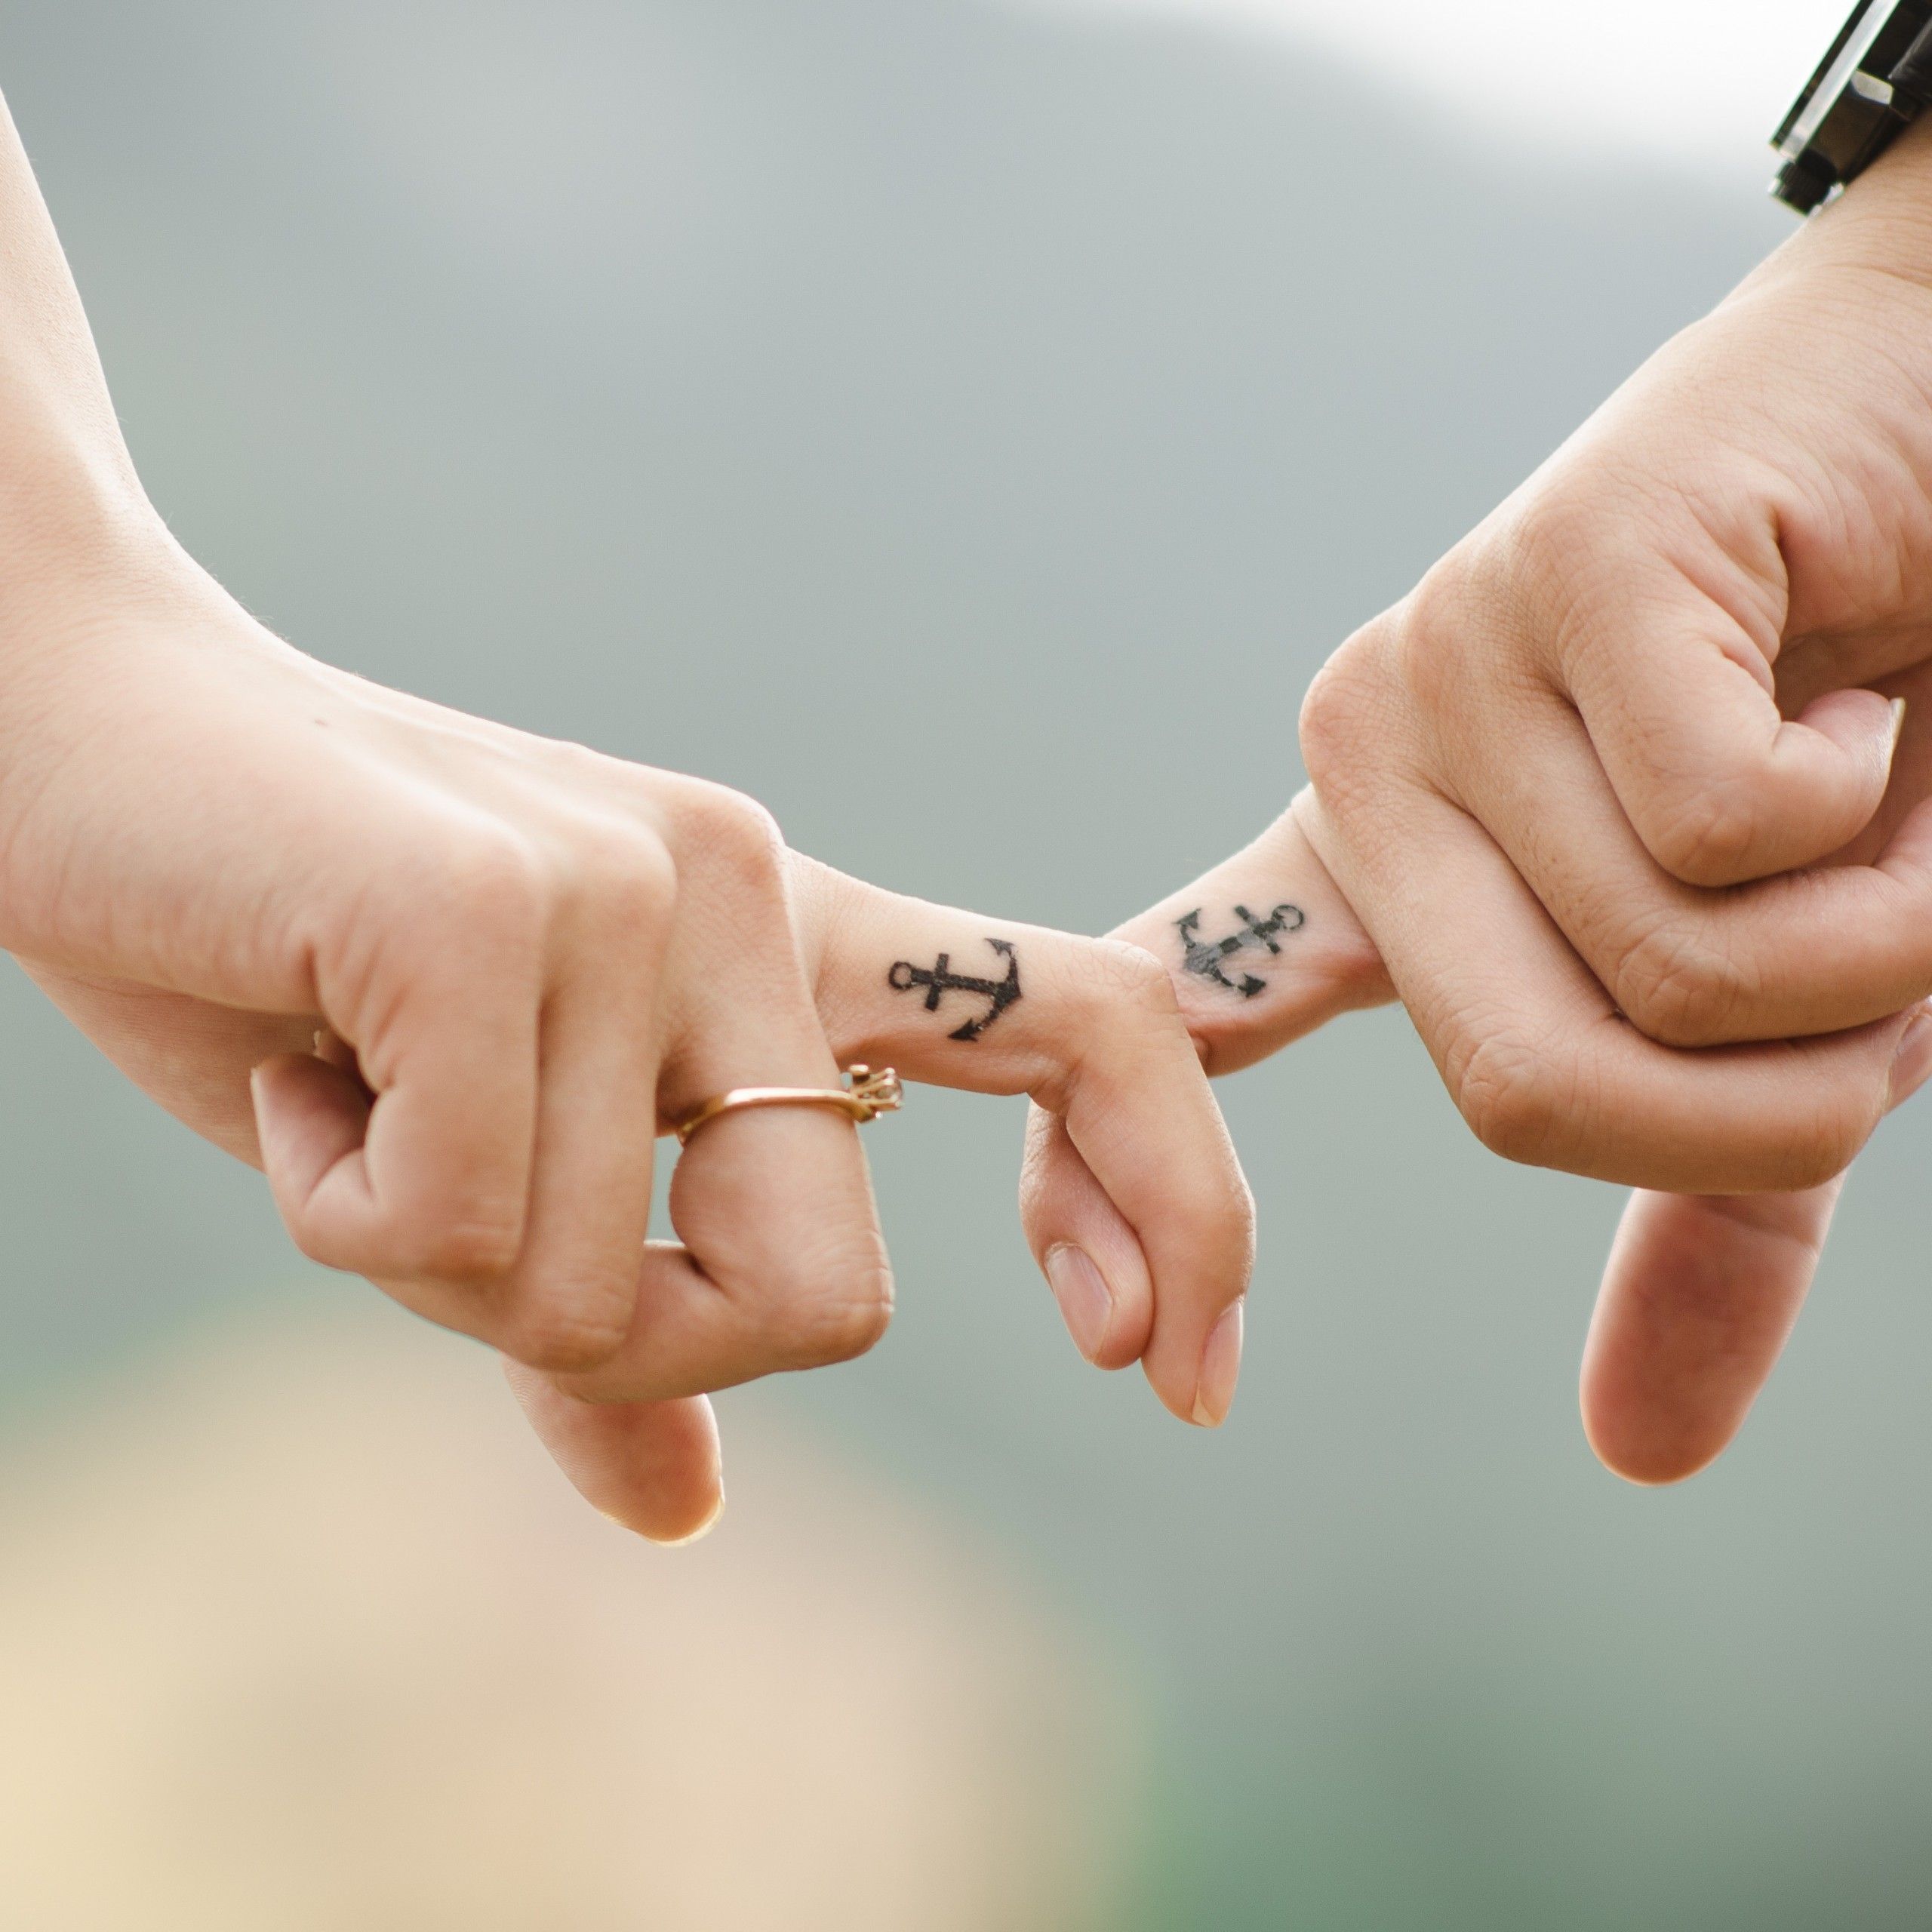 Couple 4K Wallpaper, Hands together, Fingers, Youth, Romantic, Lovers, 5K, Love